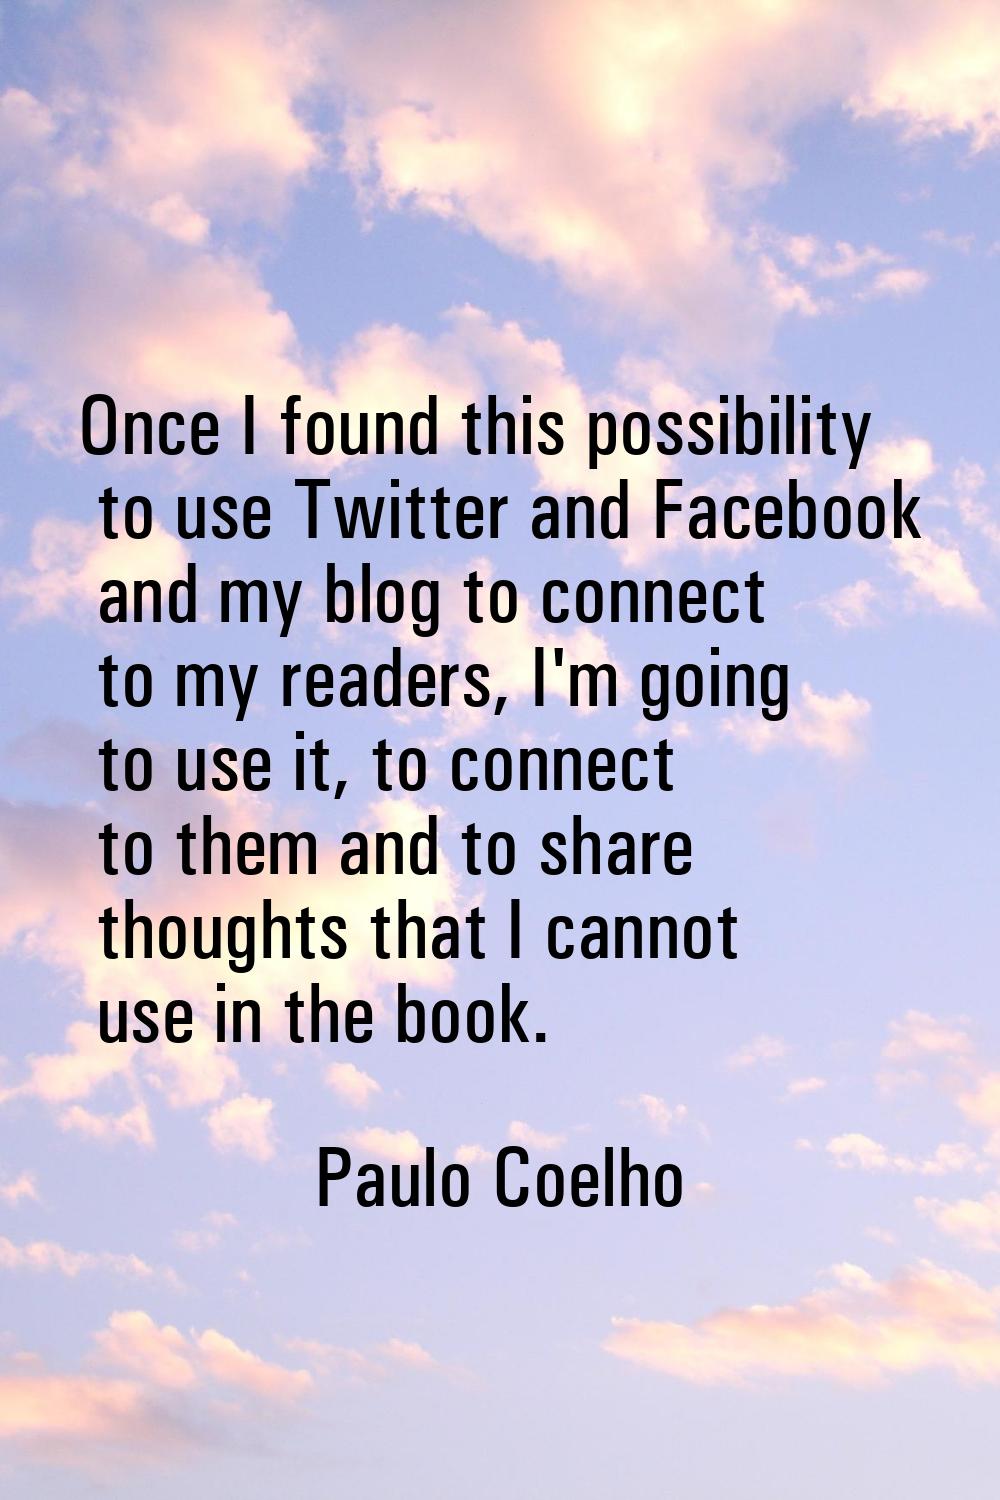 Once I found this possibility to use Twitter and Facebook and my blog to connect to my readers, I'm